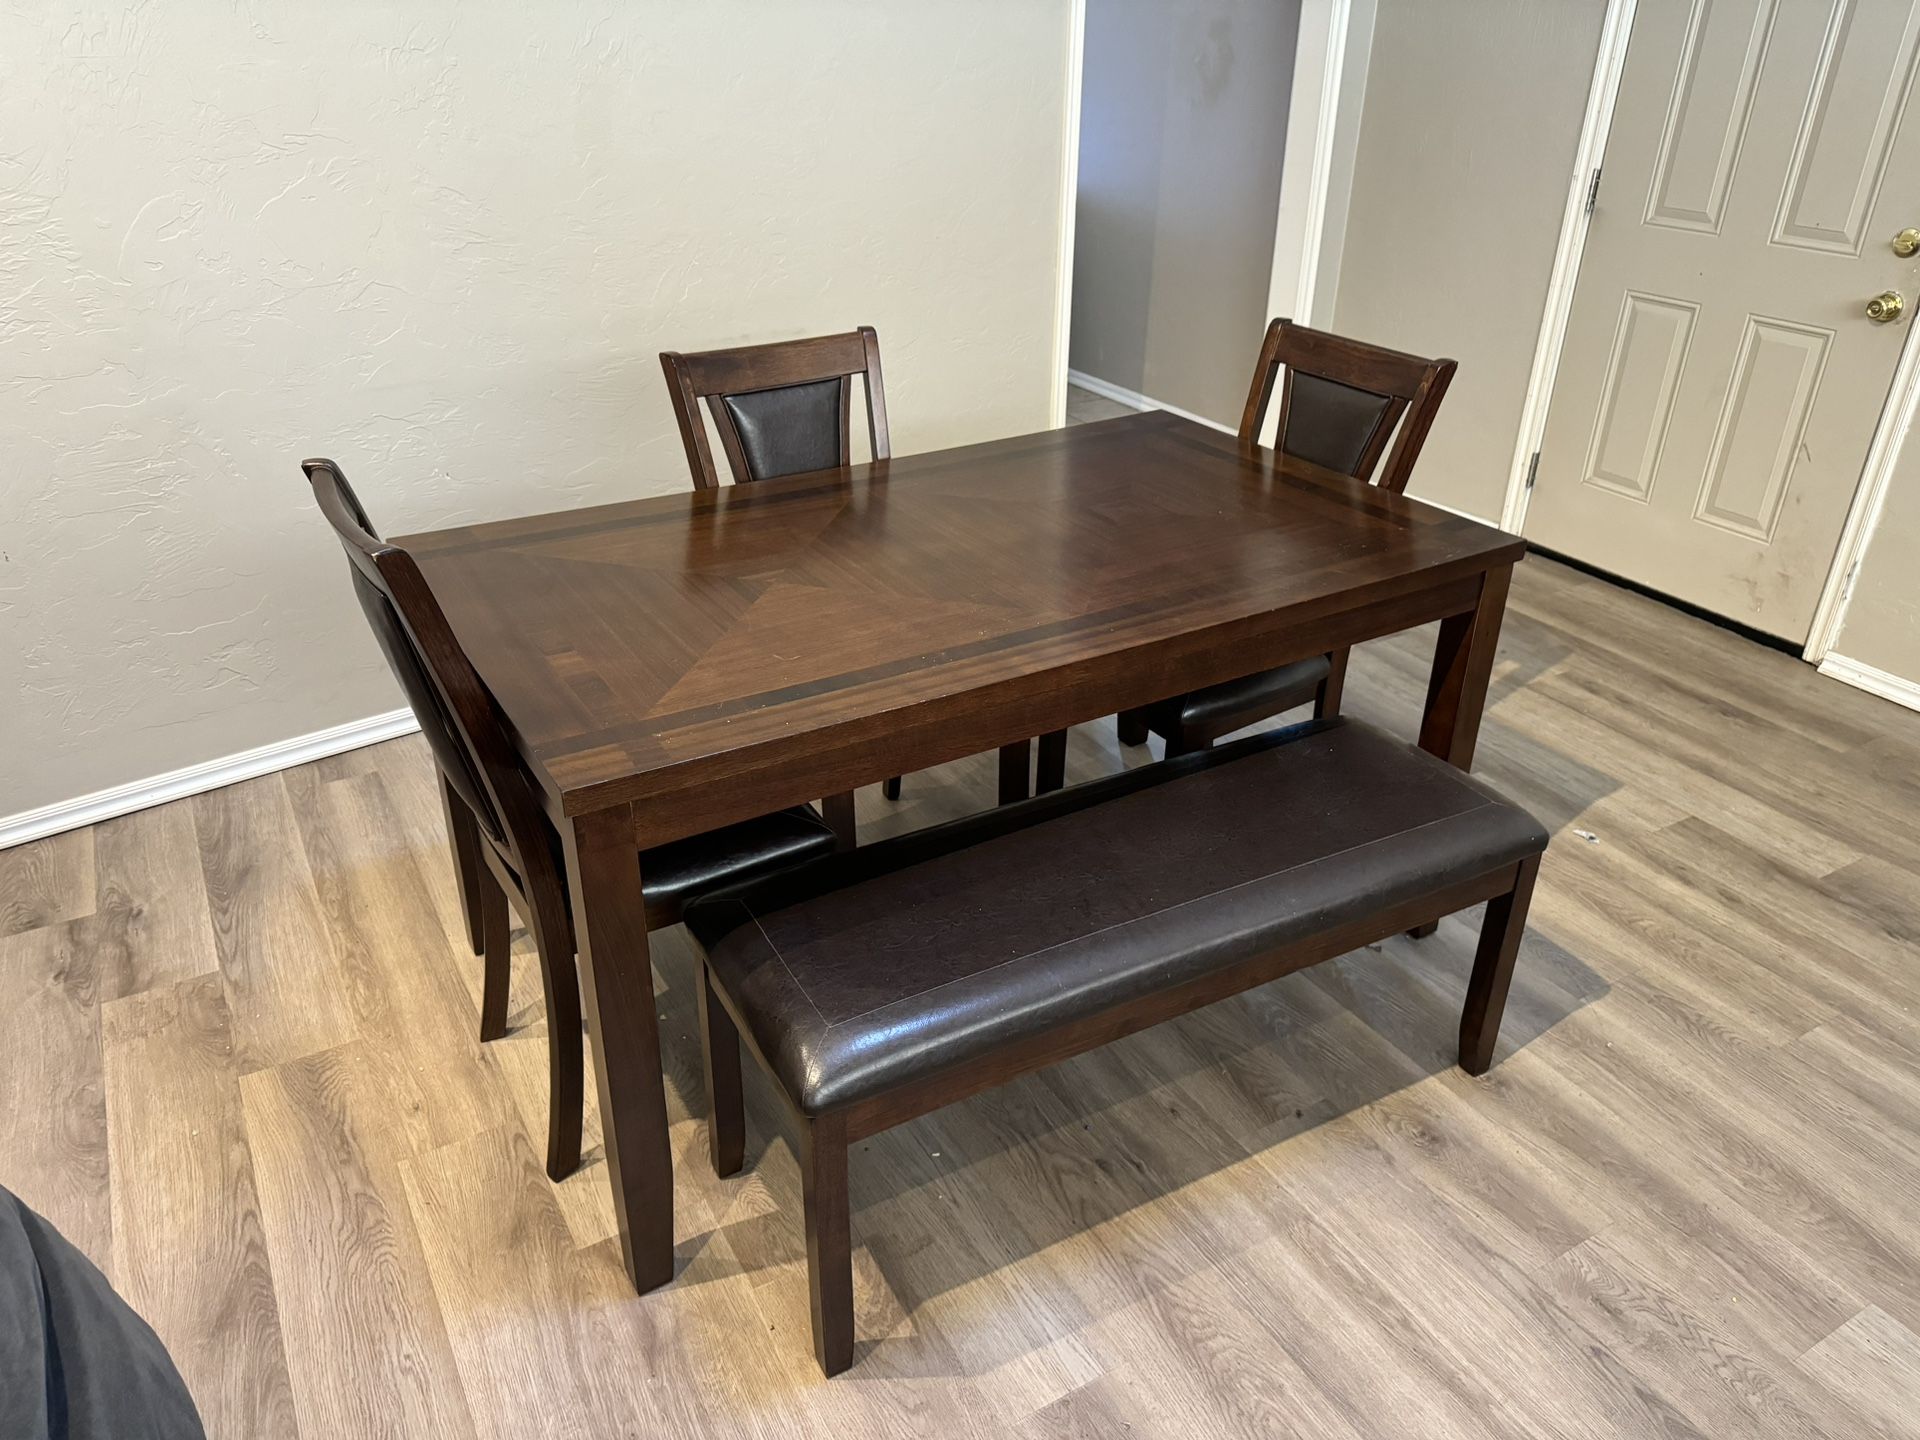 Five Piece Dining Room Set Including Bench